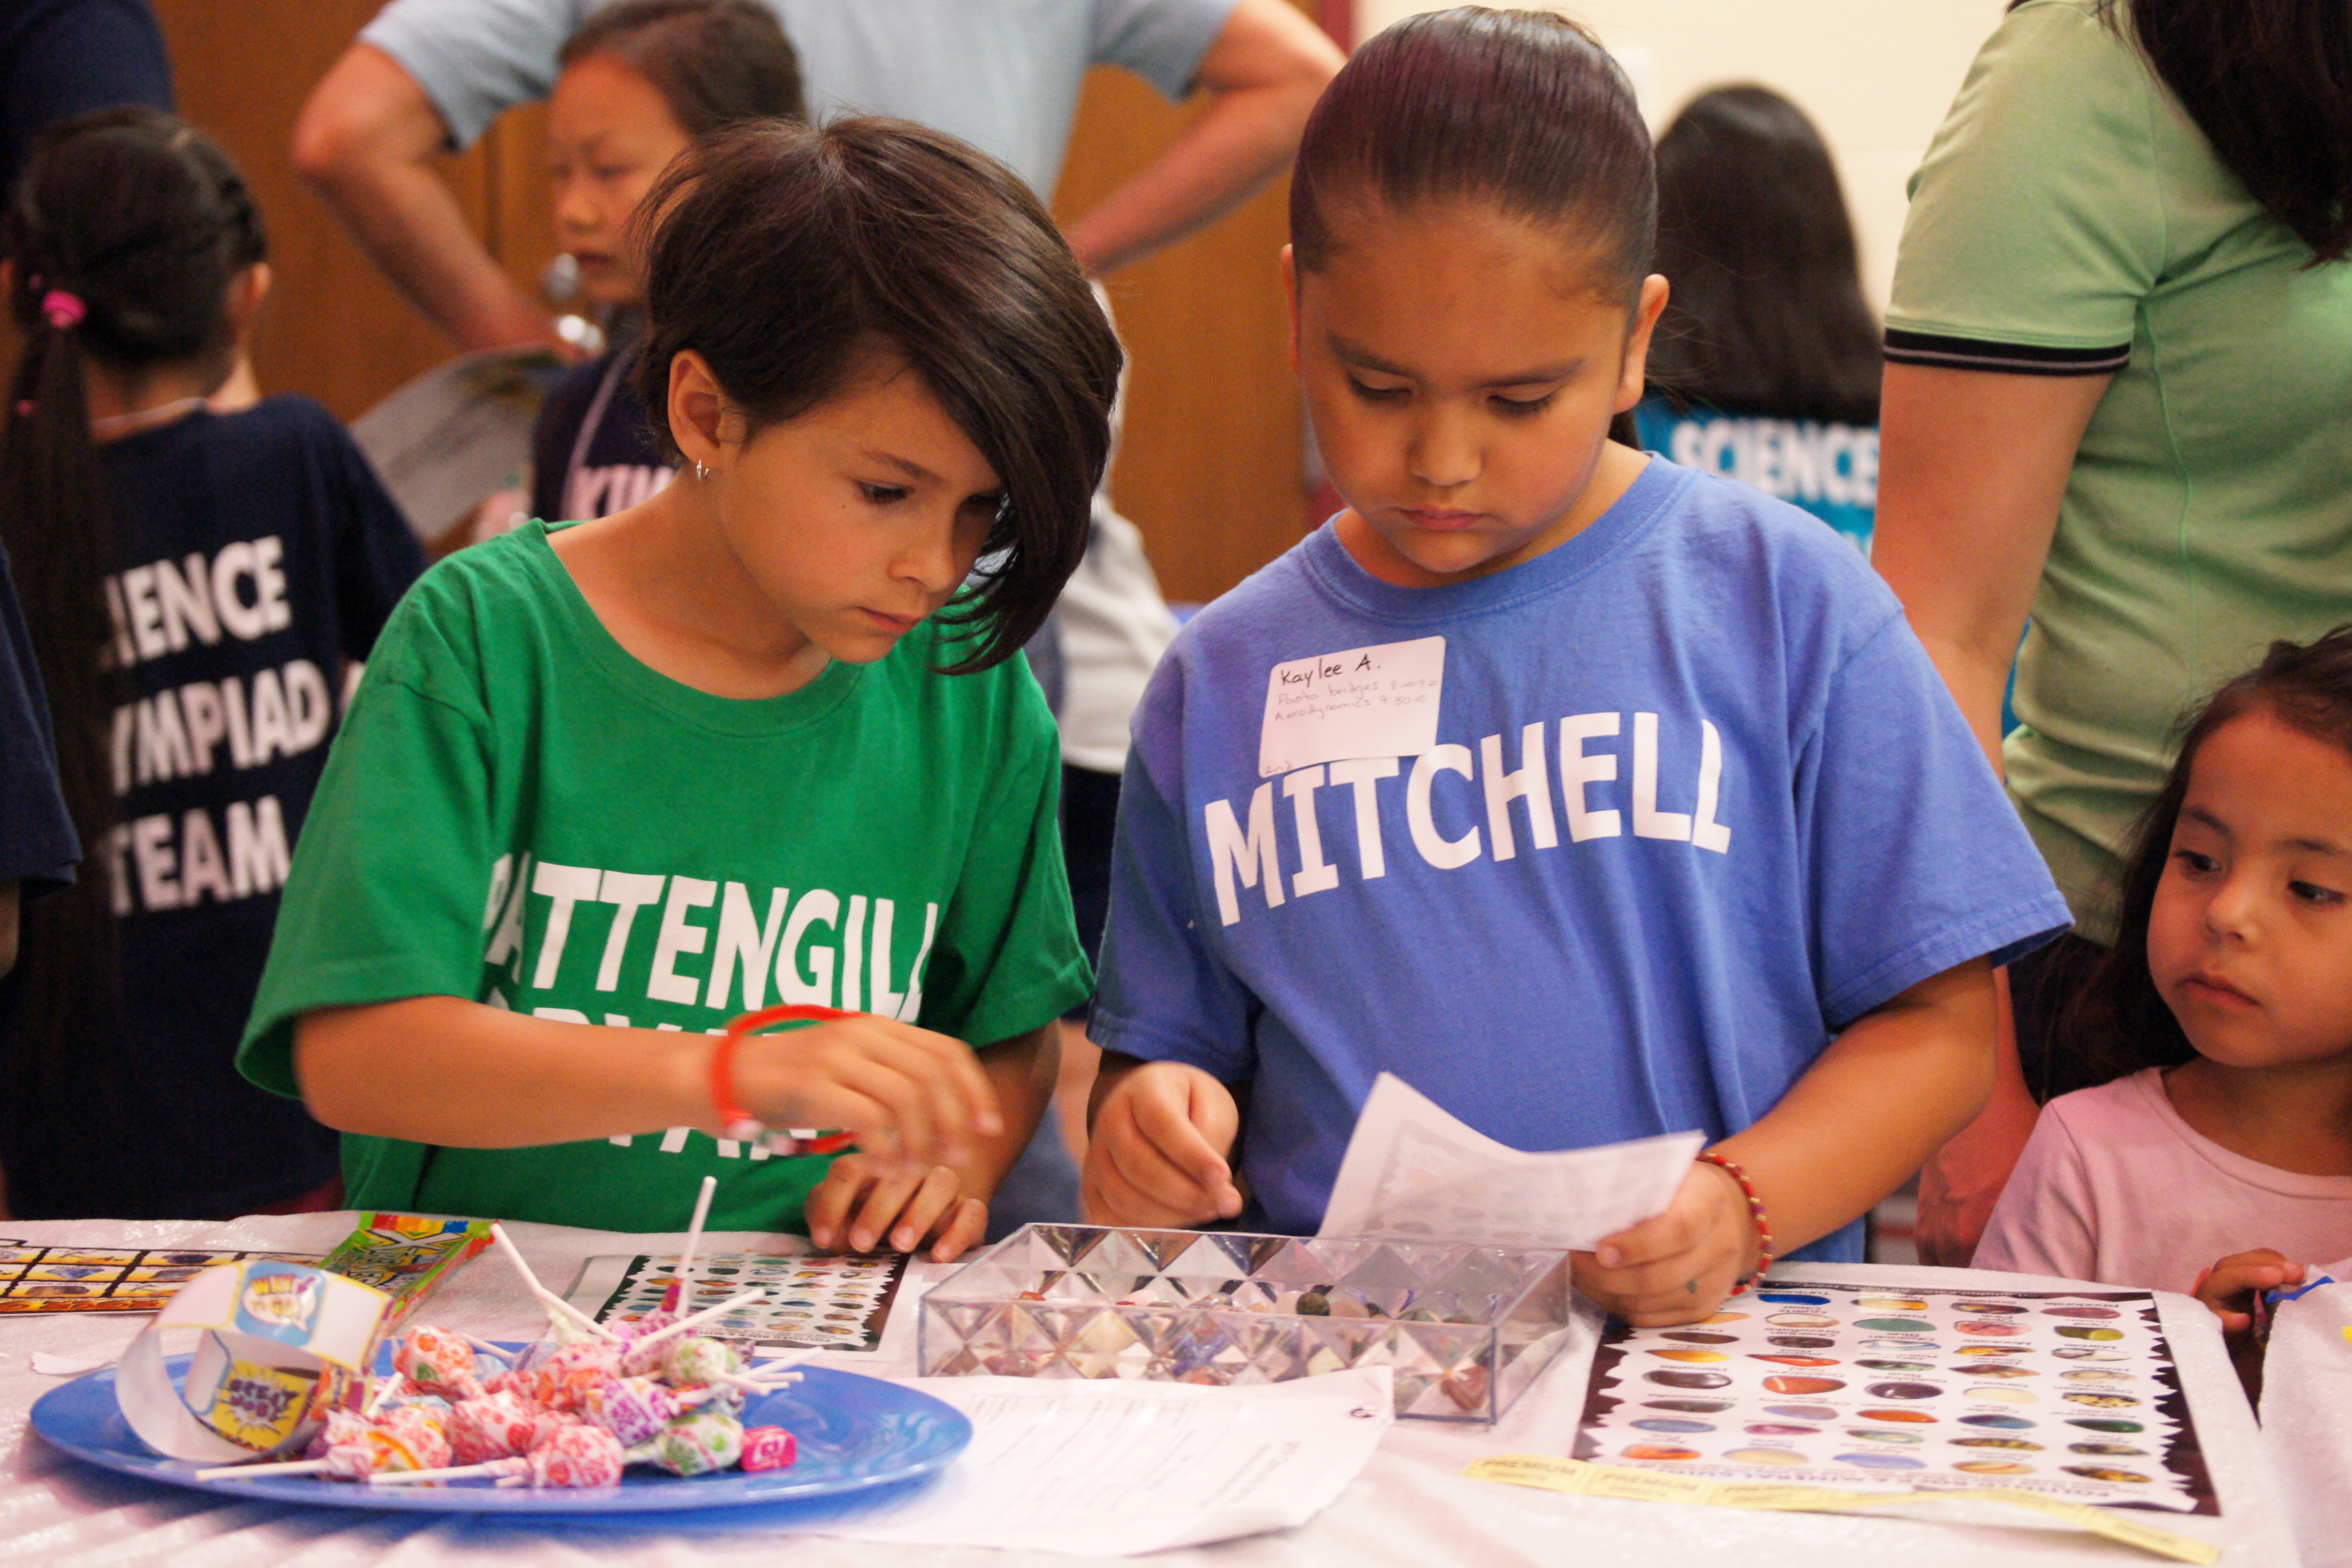 Two second grade students one wearing a green Pattengill Elementary shirt and the other in a light blue Mitchell Elementary shirt